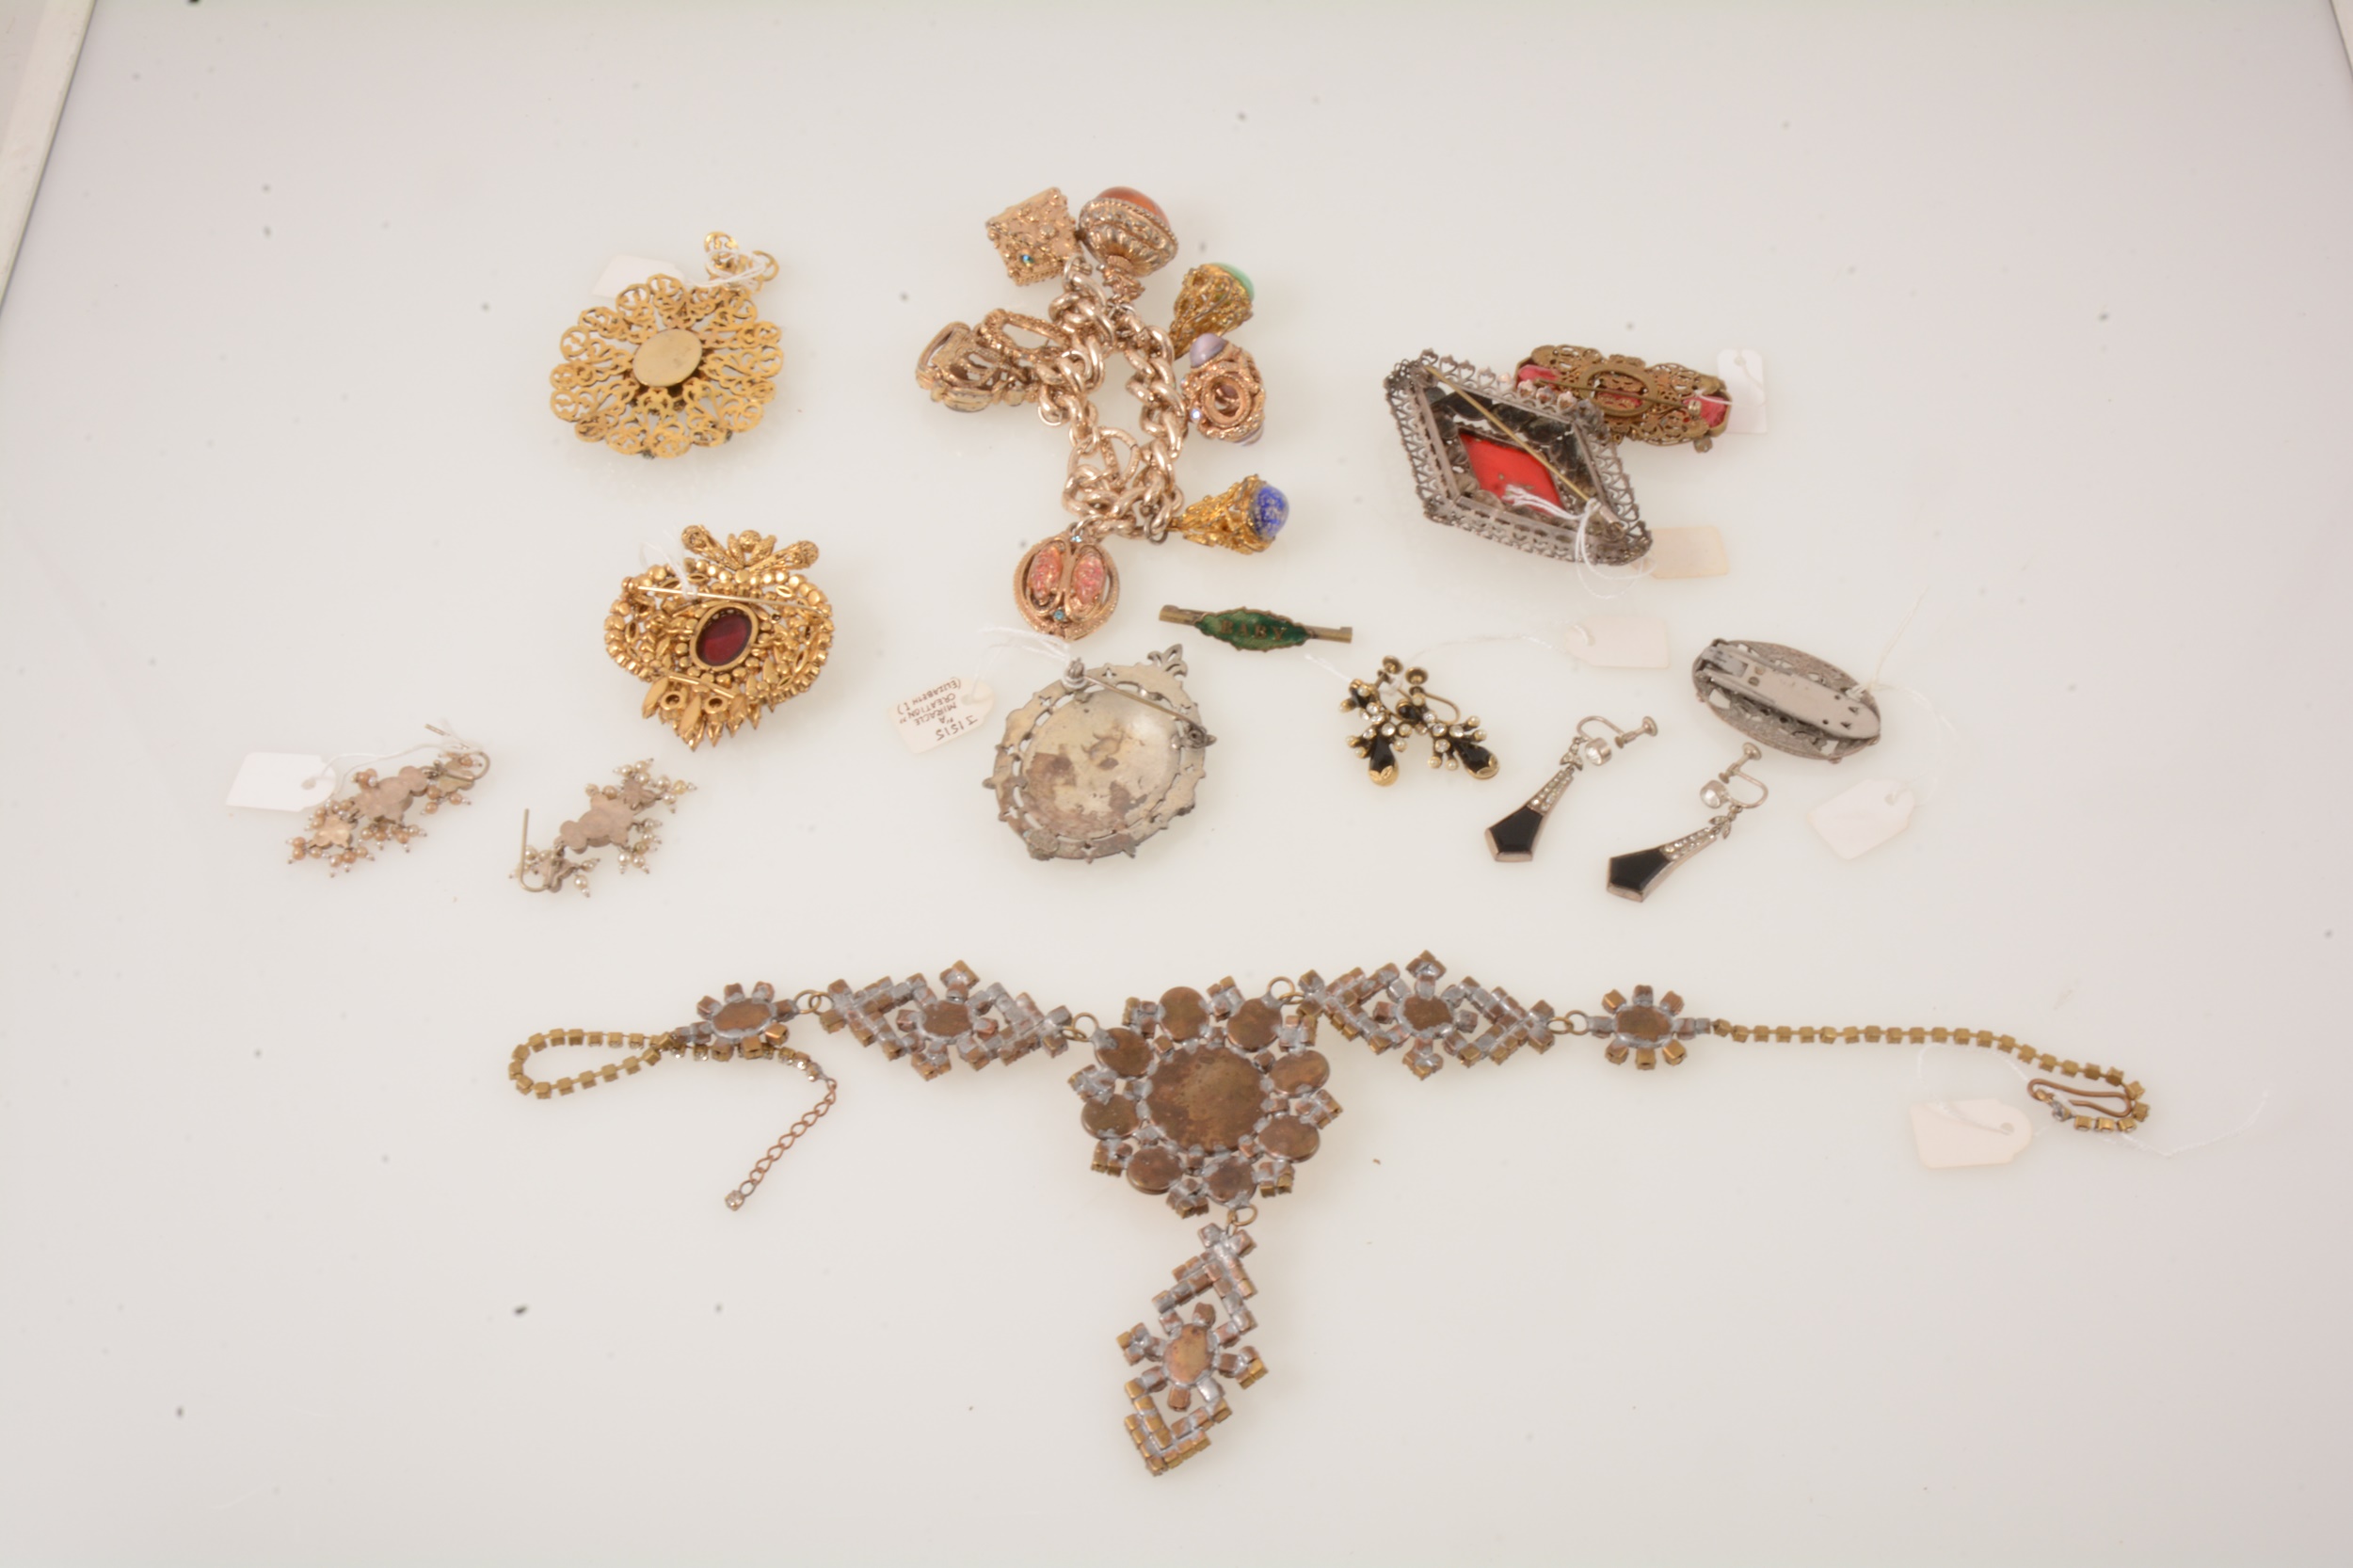 Vintage costume jewellery in the antique style, brooches, bracelet with seals, earrings. - Image 2 of 16